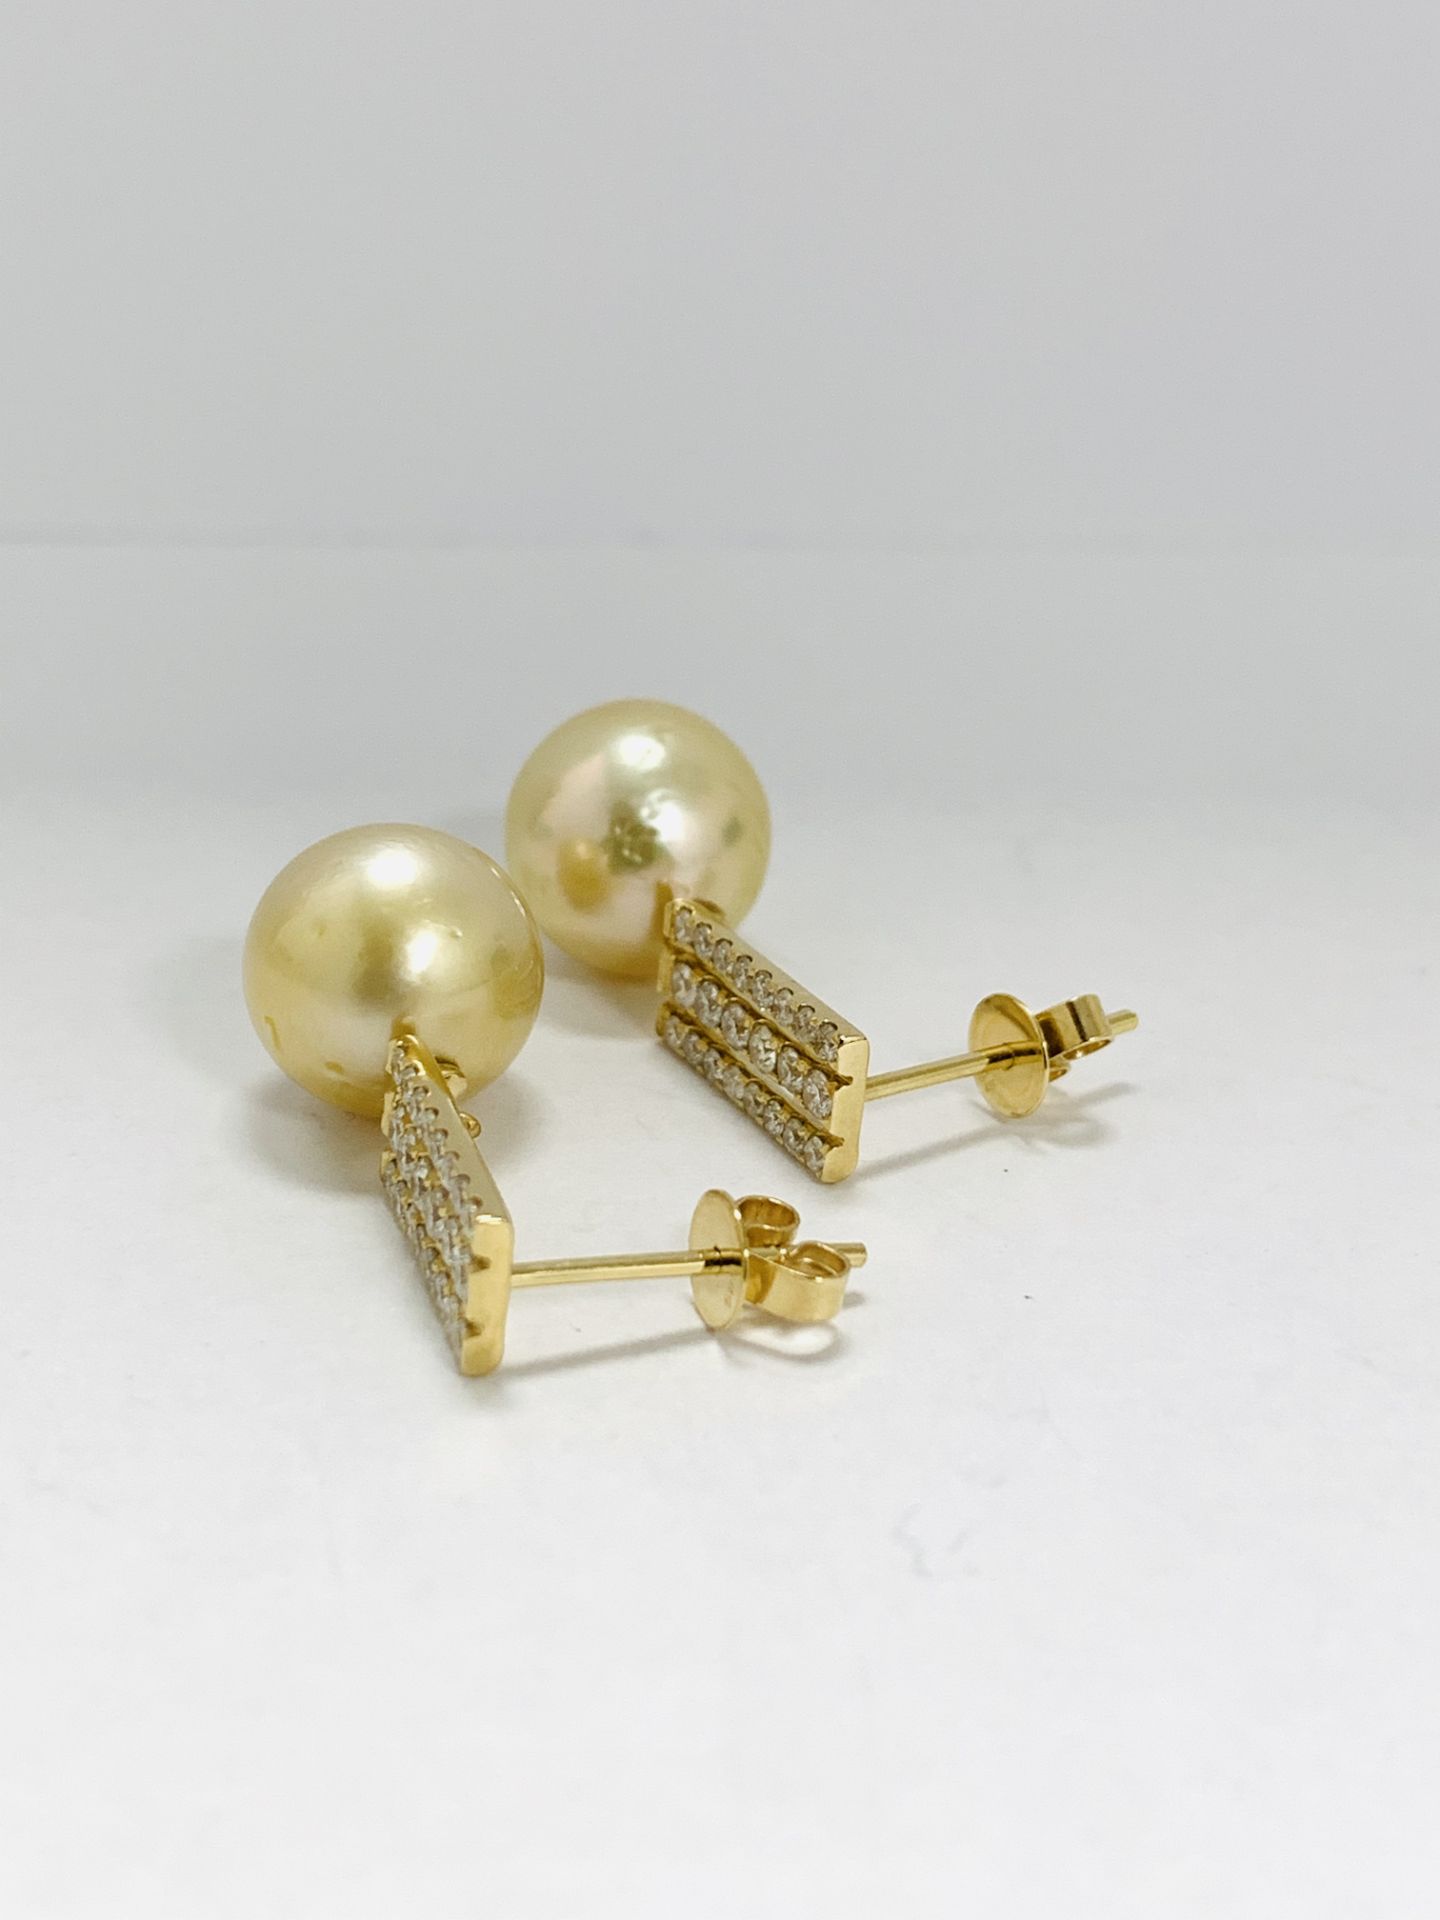 14K Yellow Gold Pair Of Earrings - Image 3 of 9